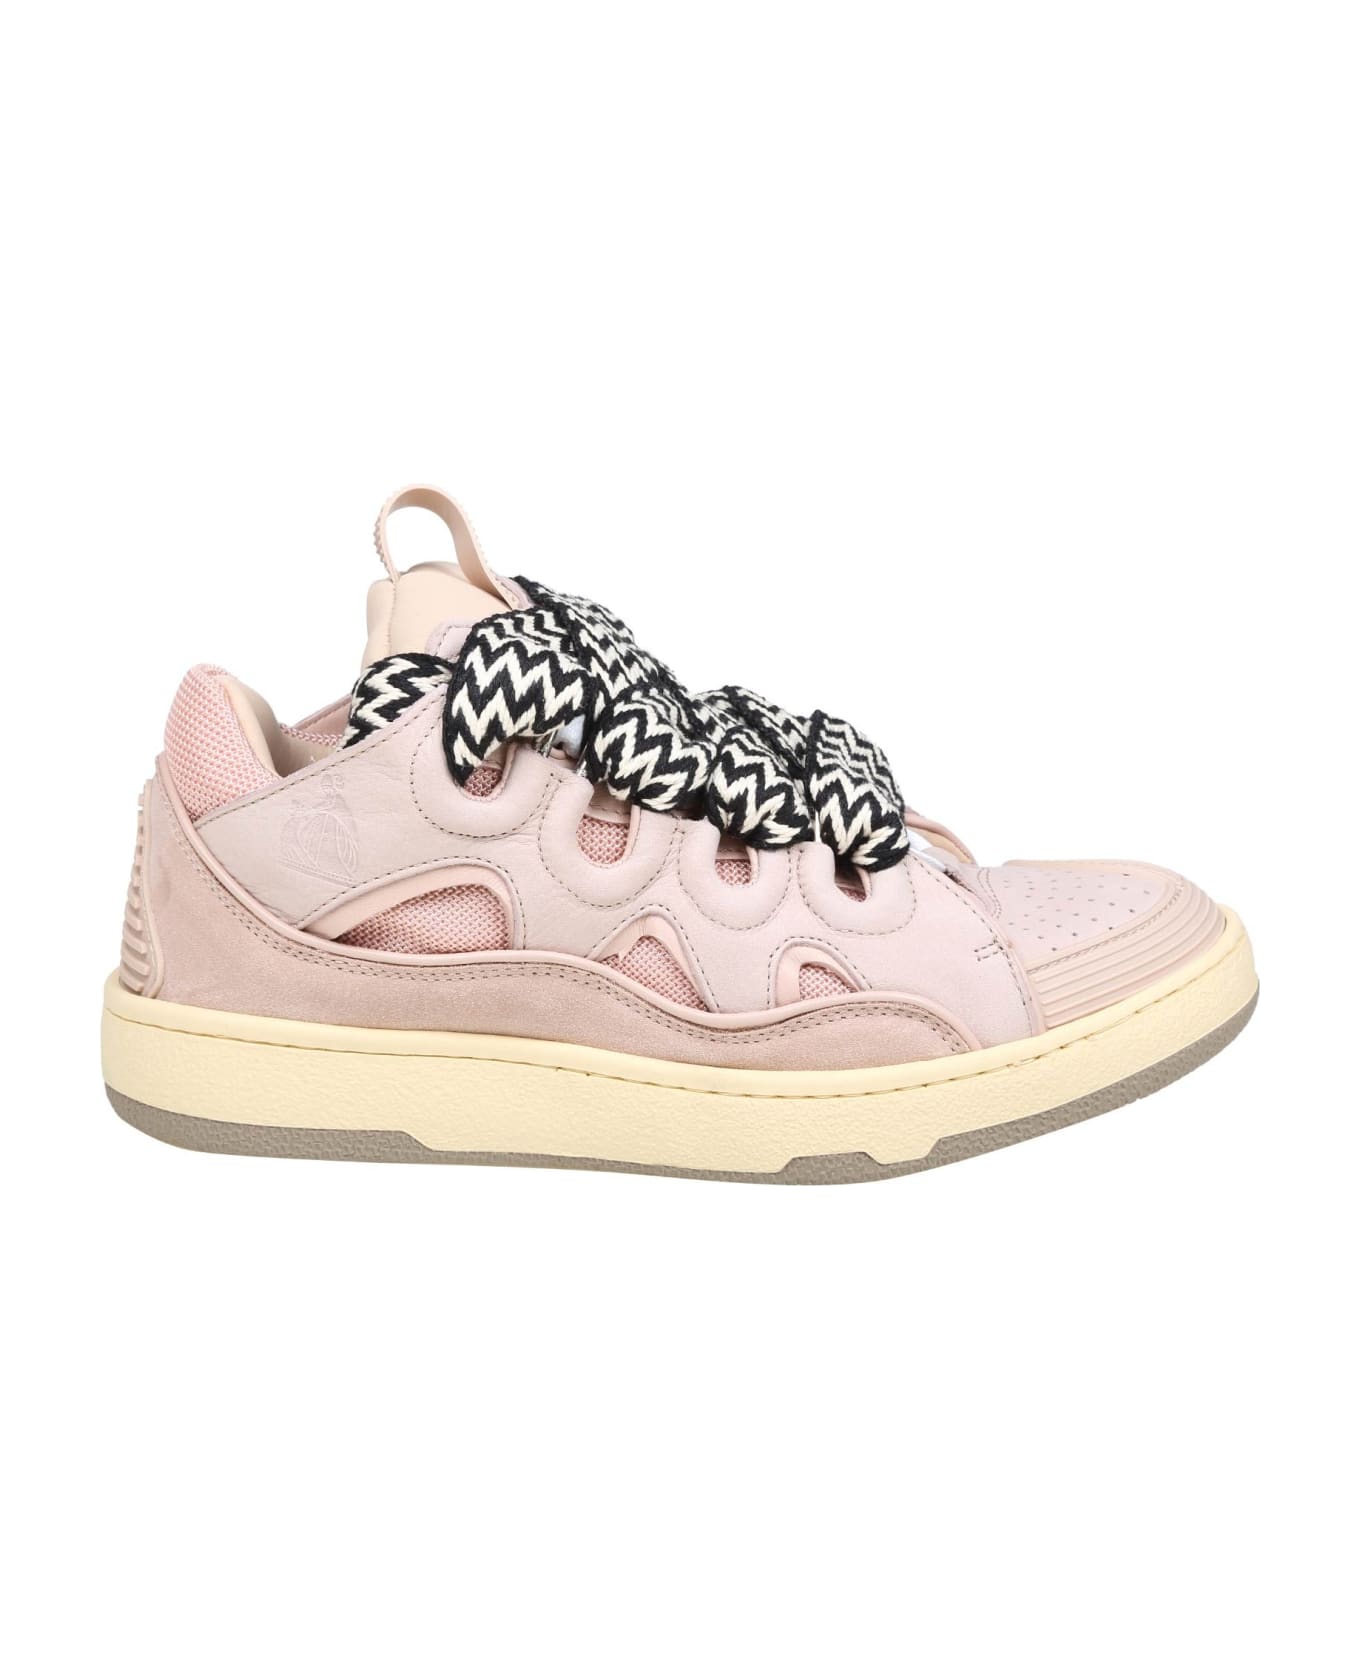 Lanvin Skate Sneakers In Pink Leather - Pink